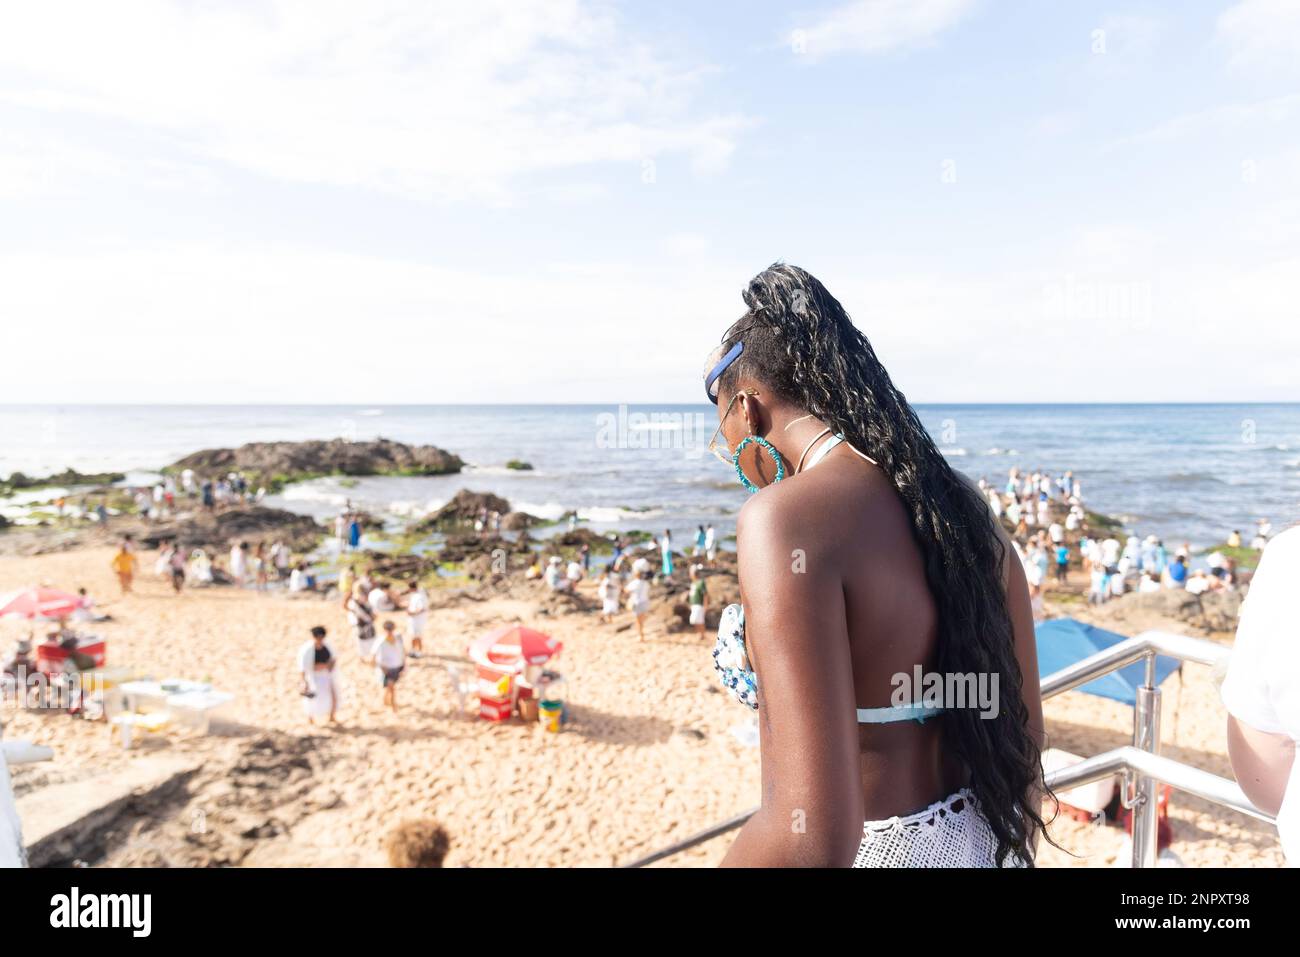 Salvador, Bahia, Brazil - February 02, 2023: Many people are on the beach of Rio Vermelho, offering gifts for the Yemanja party, in Salvador, Bahia. Stock Photo